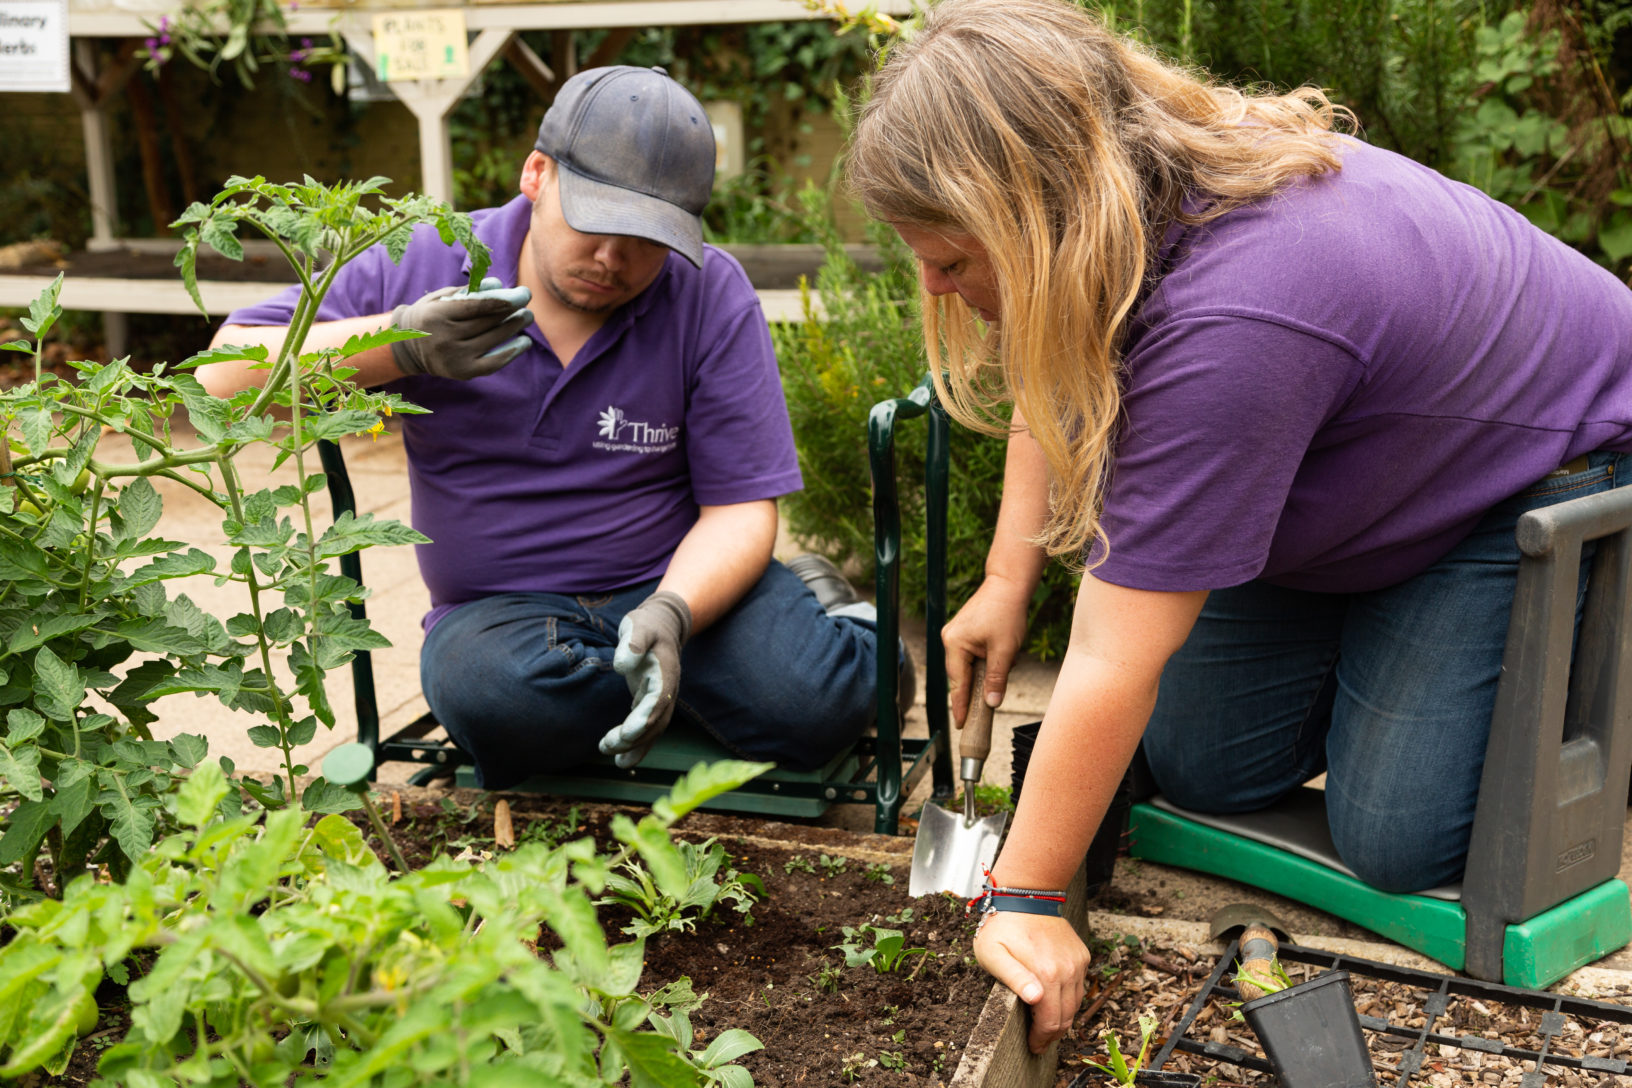 Thrive charity horticulture